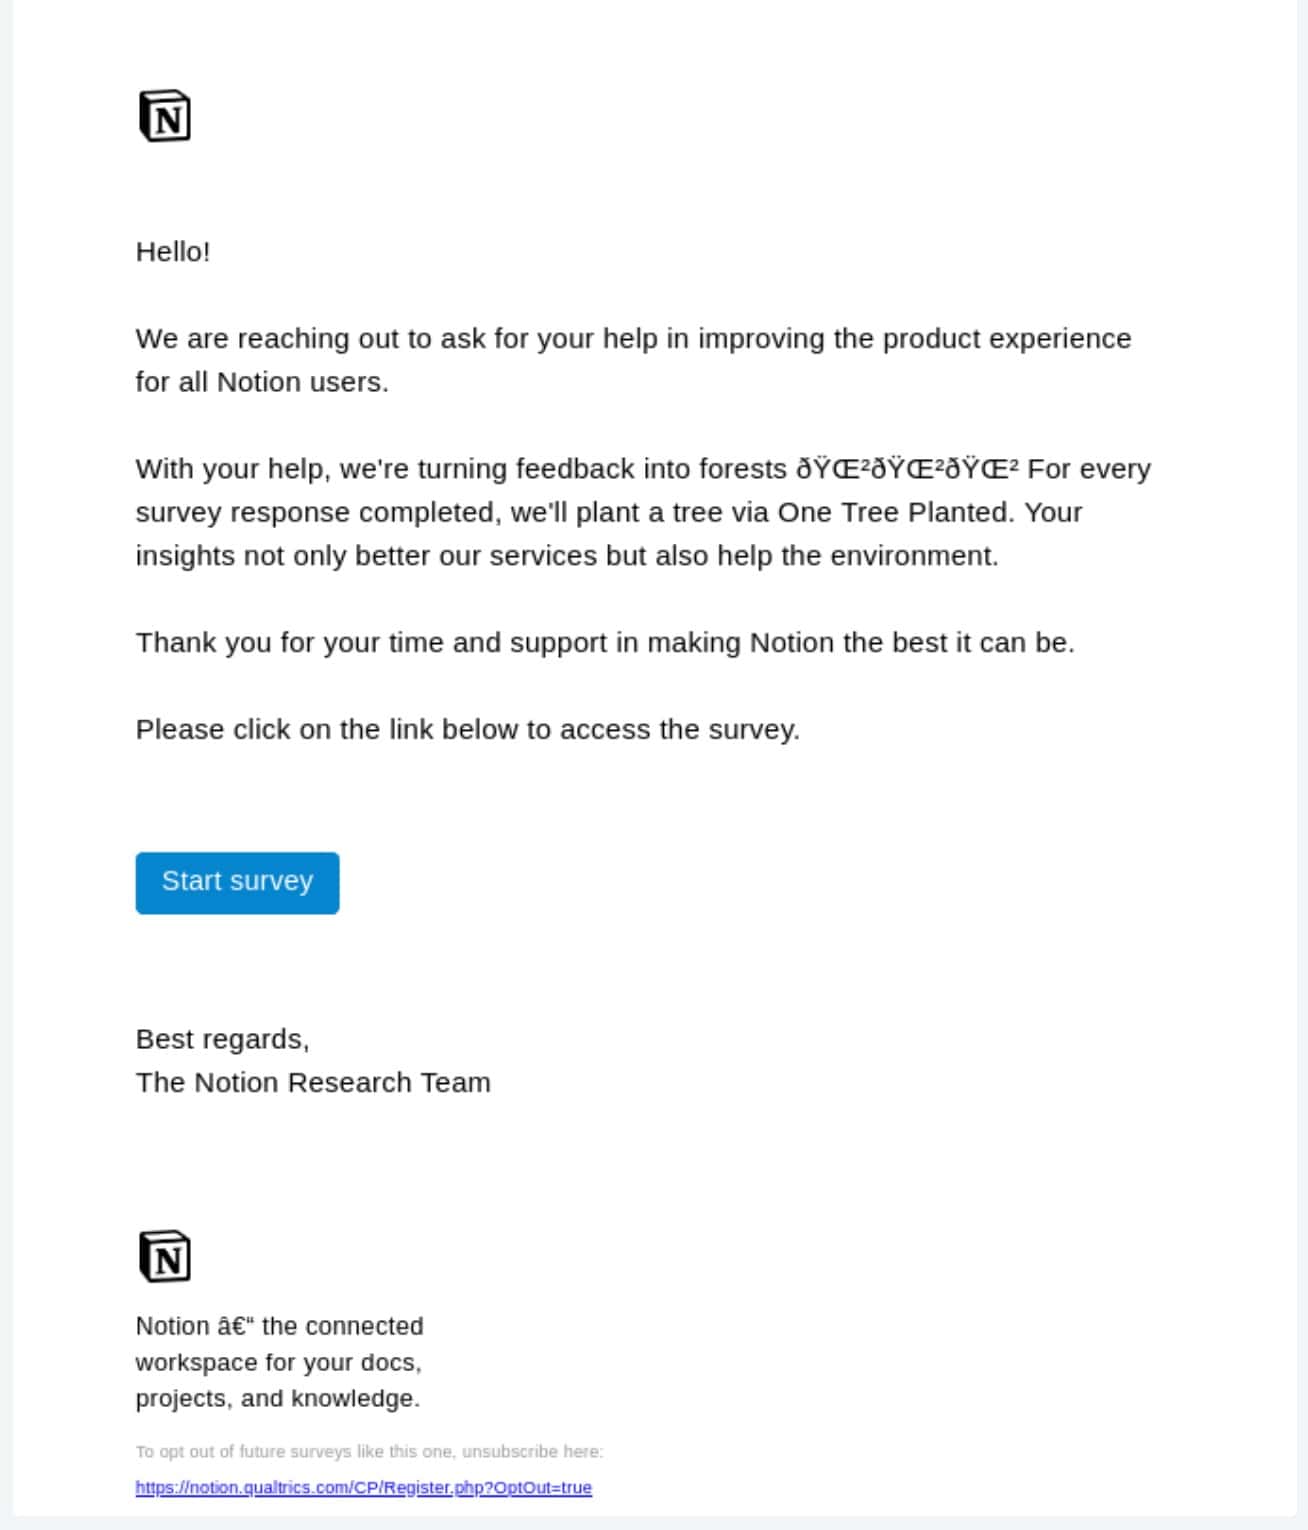 Customer feedback email example by Notion